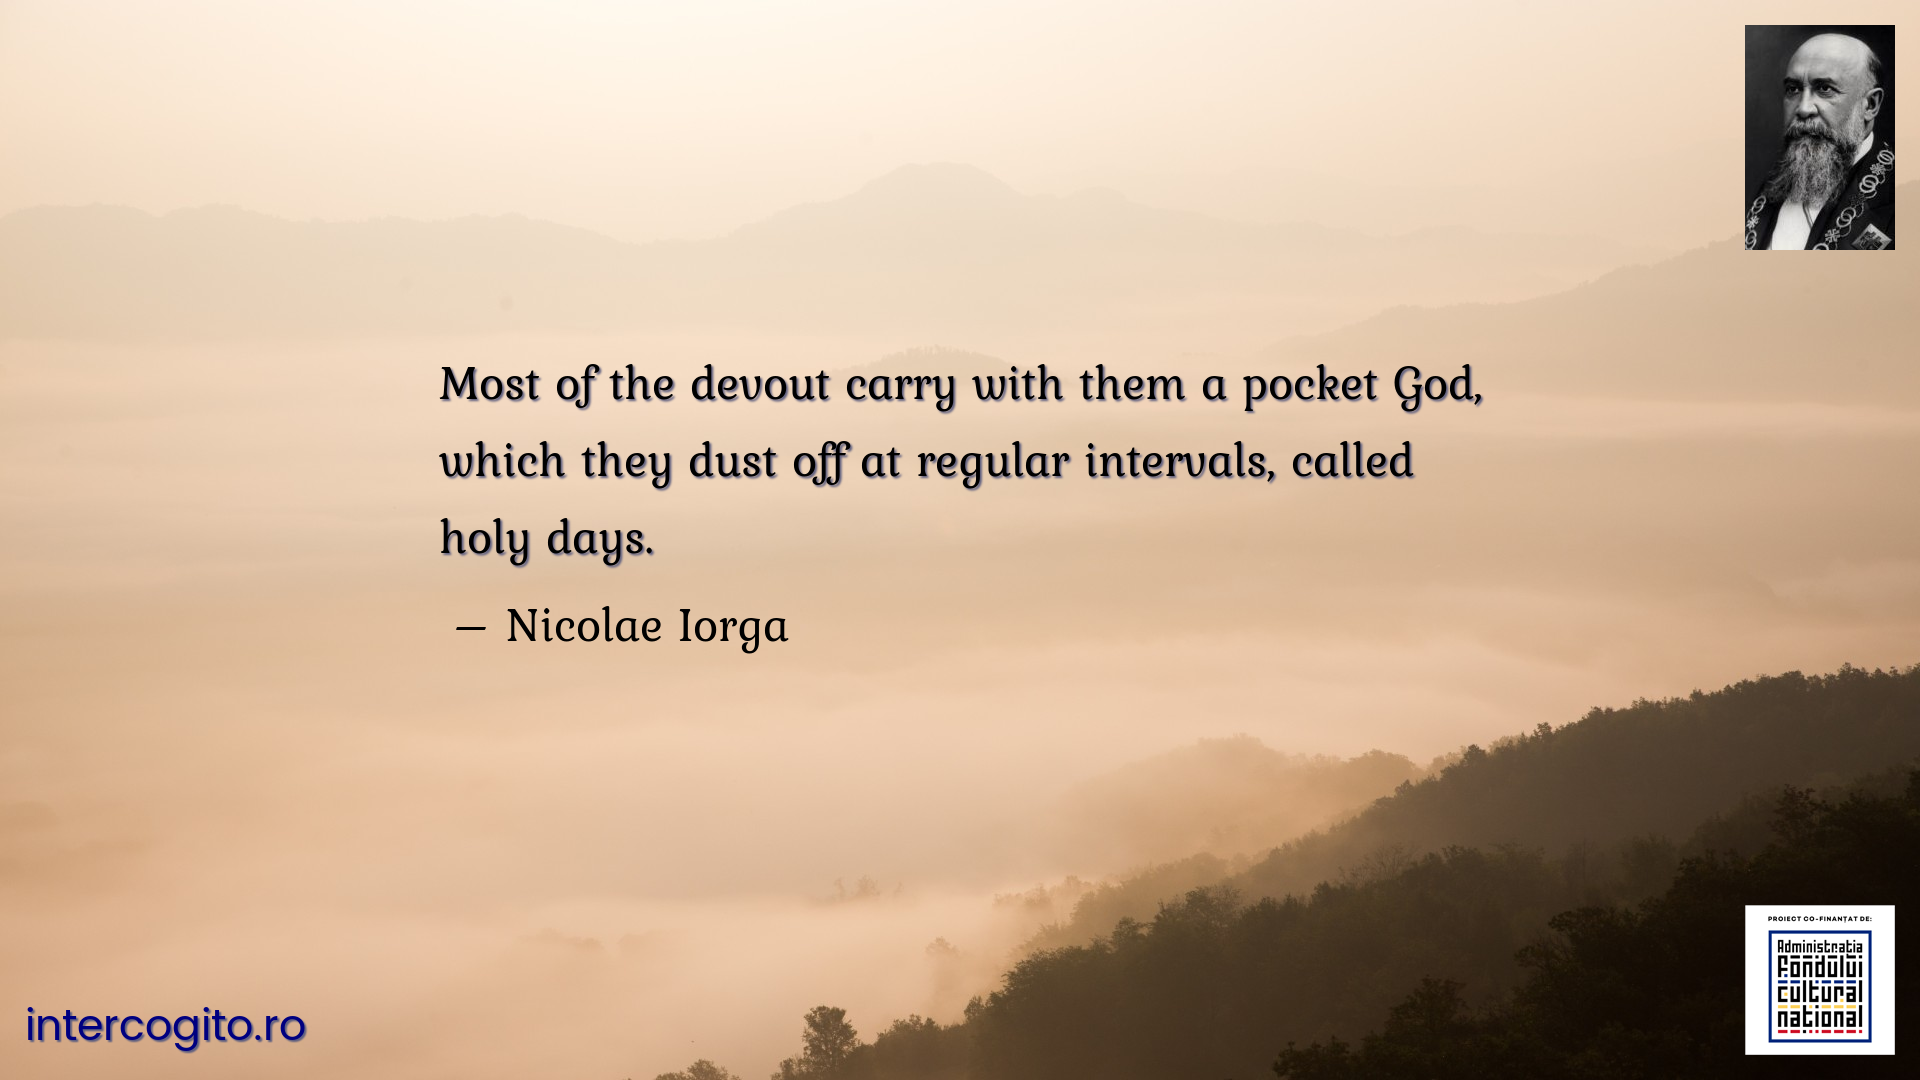 Most of the devout carry with them a pocket God, which they dust off at regular intervals, called holy days.